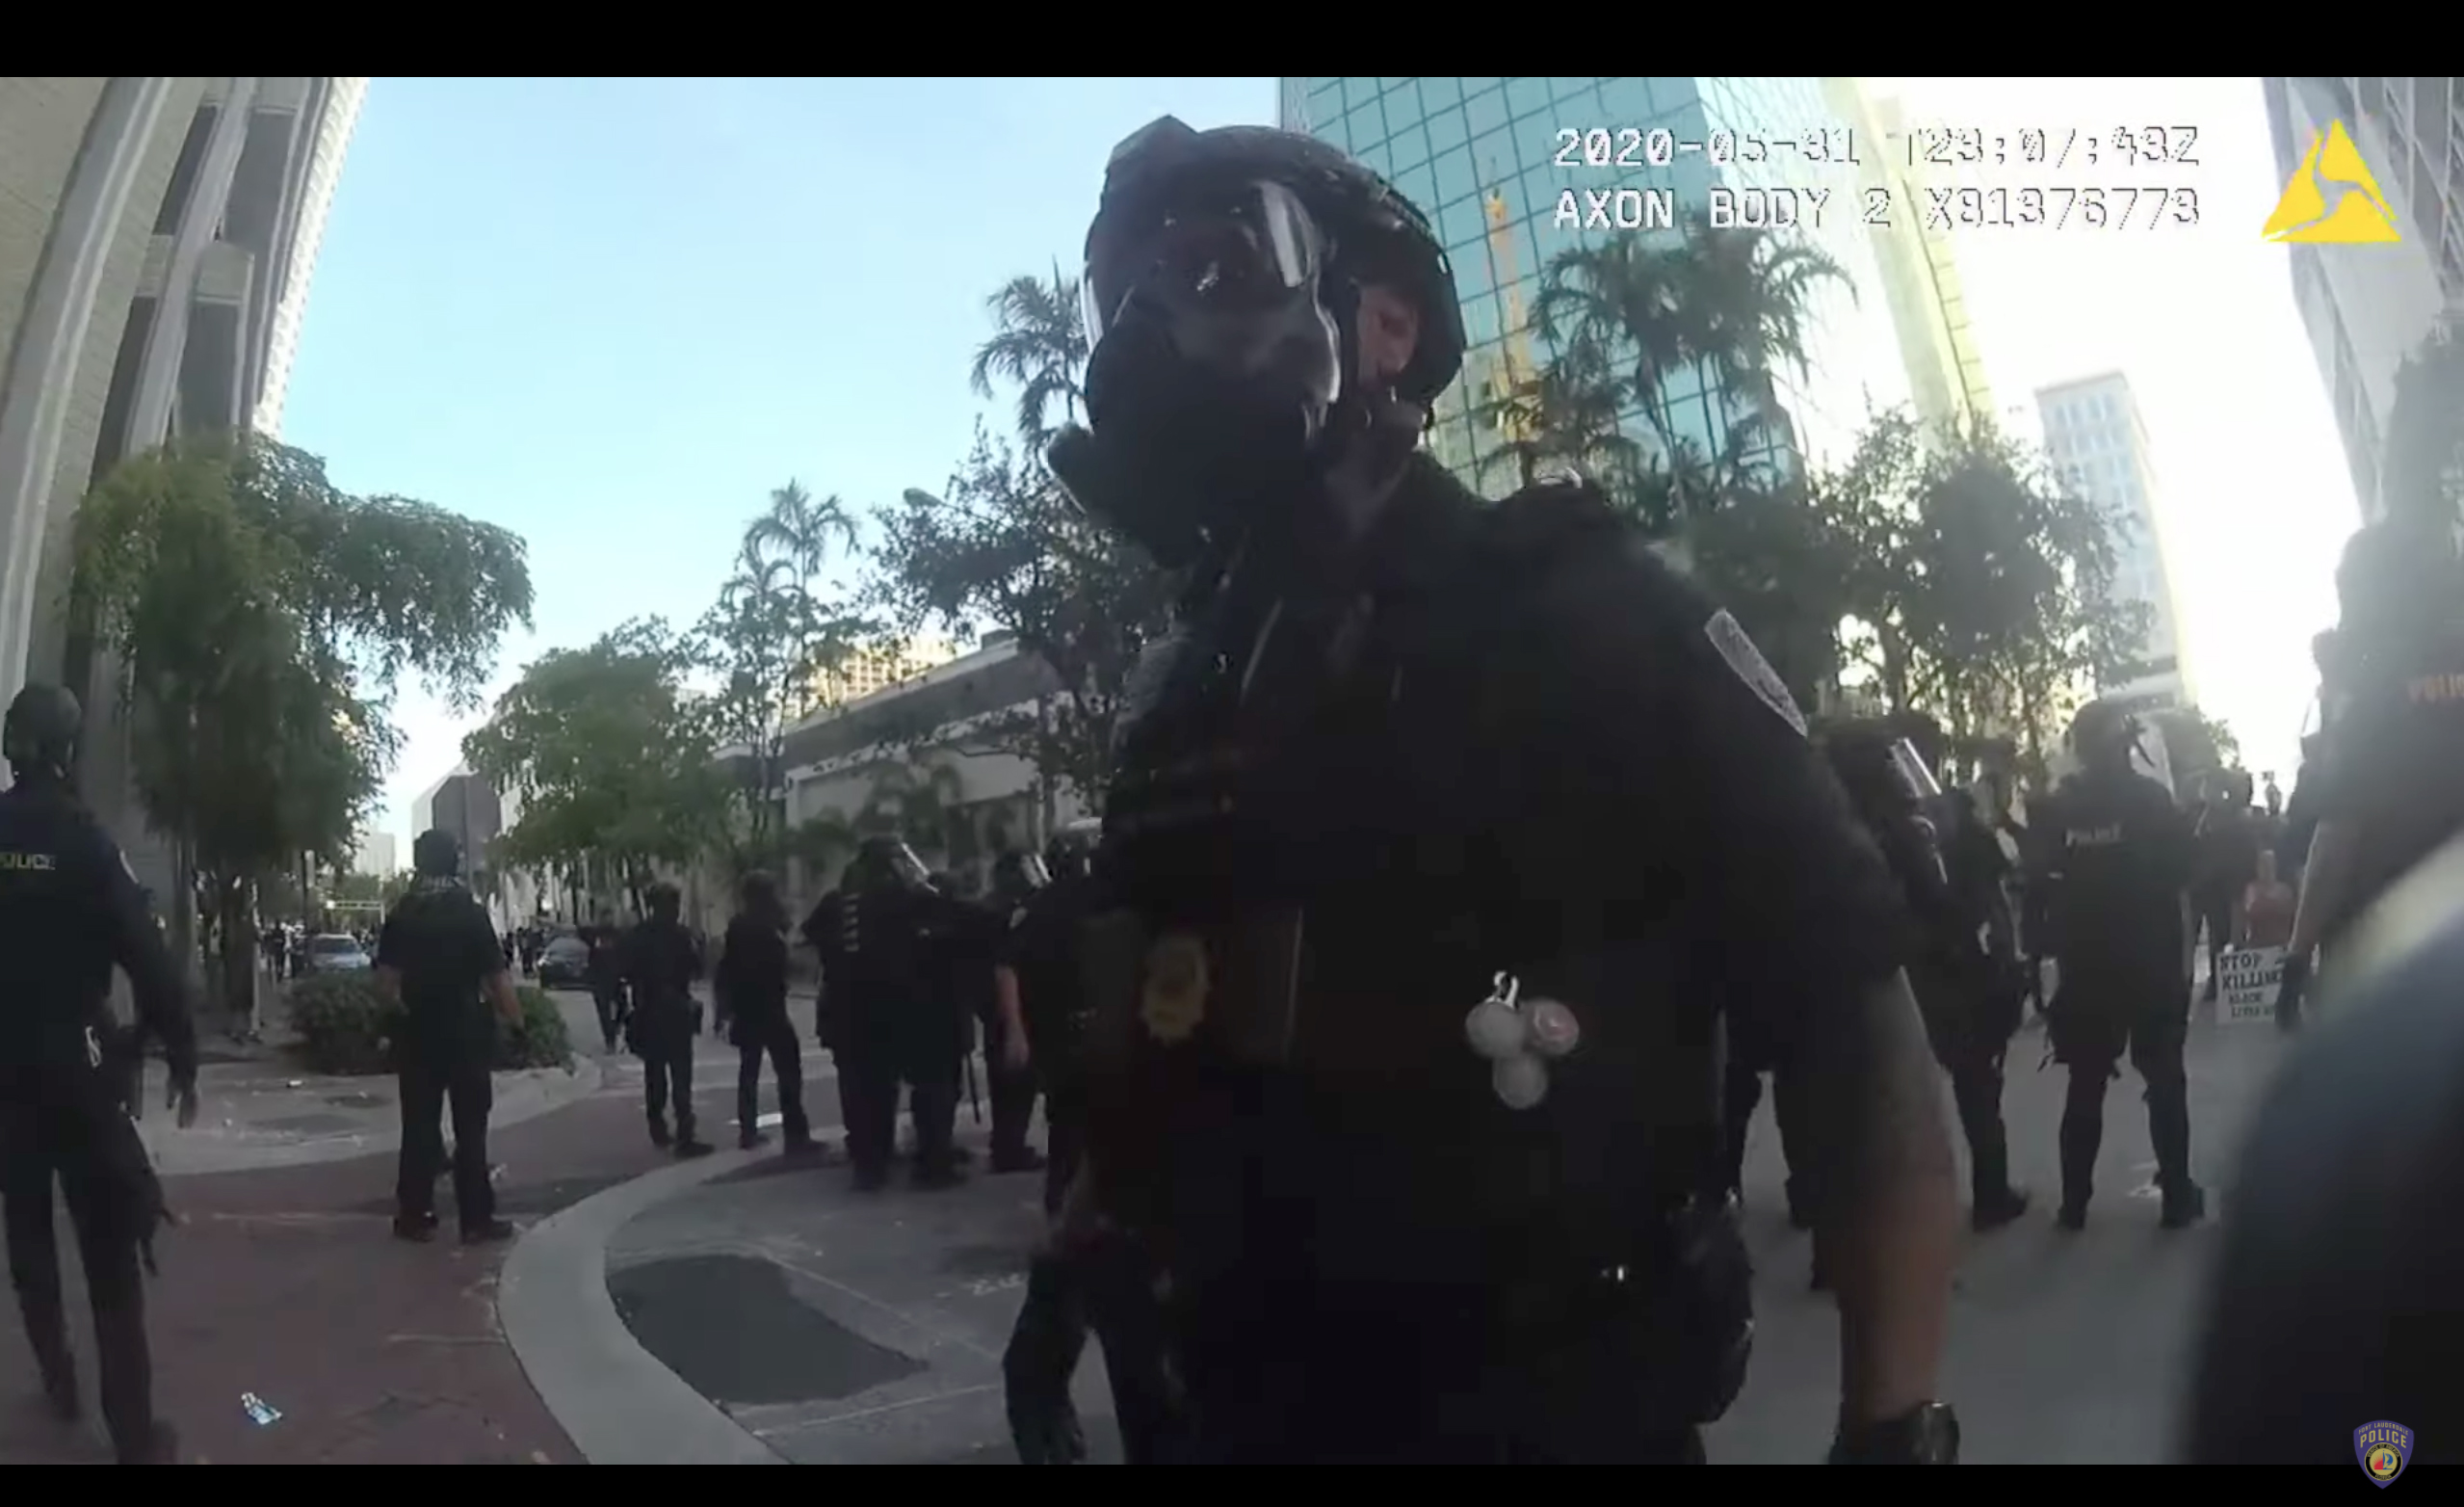 PHOTO: Police body cam footage from the May 31 protest in Fort Lauderdale, Fla. was released.